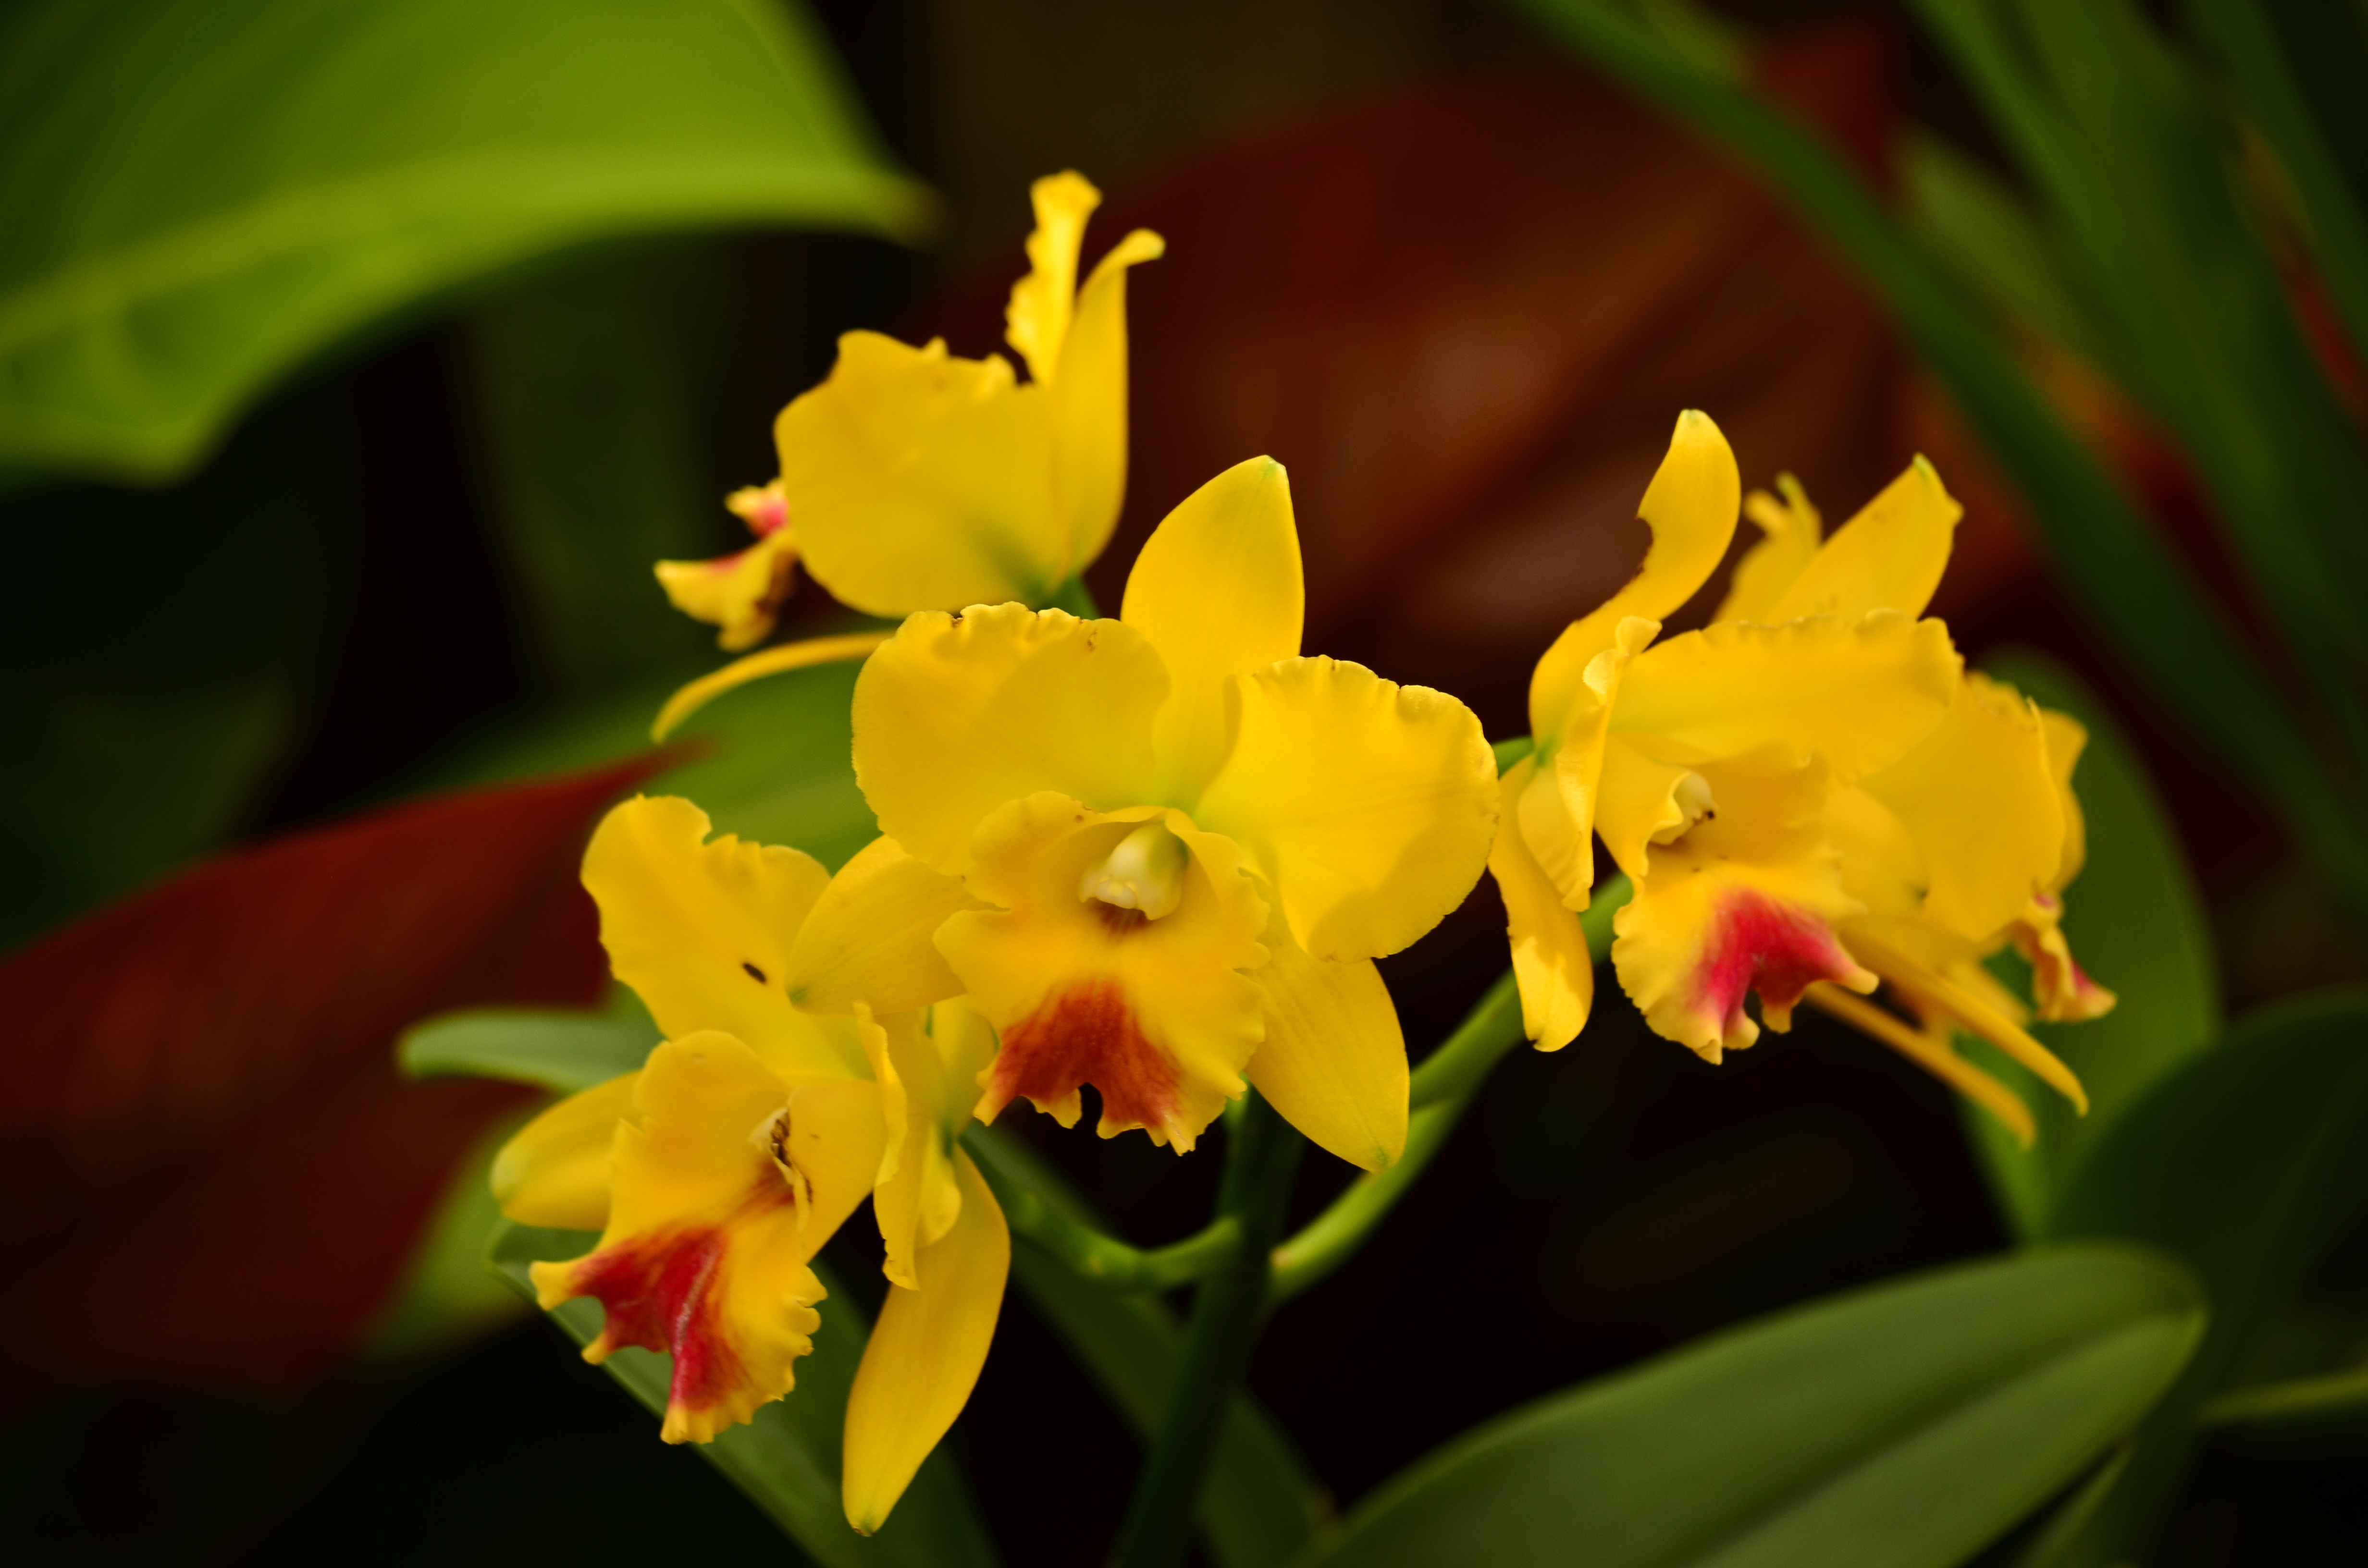 Yellow Orchids Cymbidiums Flowers At Garden Free Image Download 